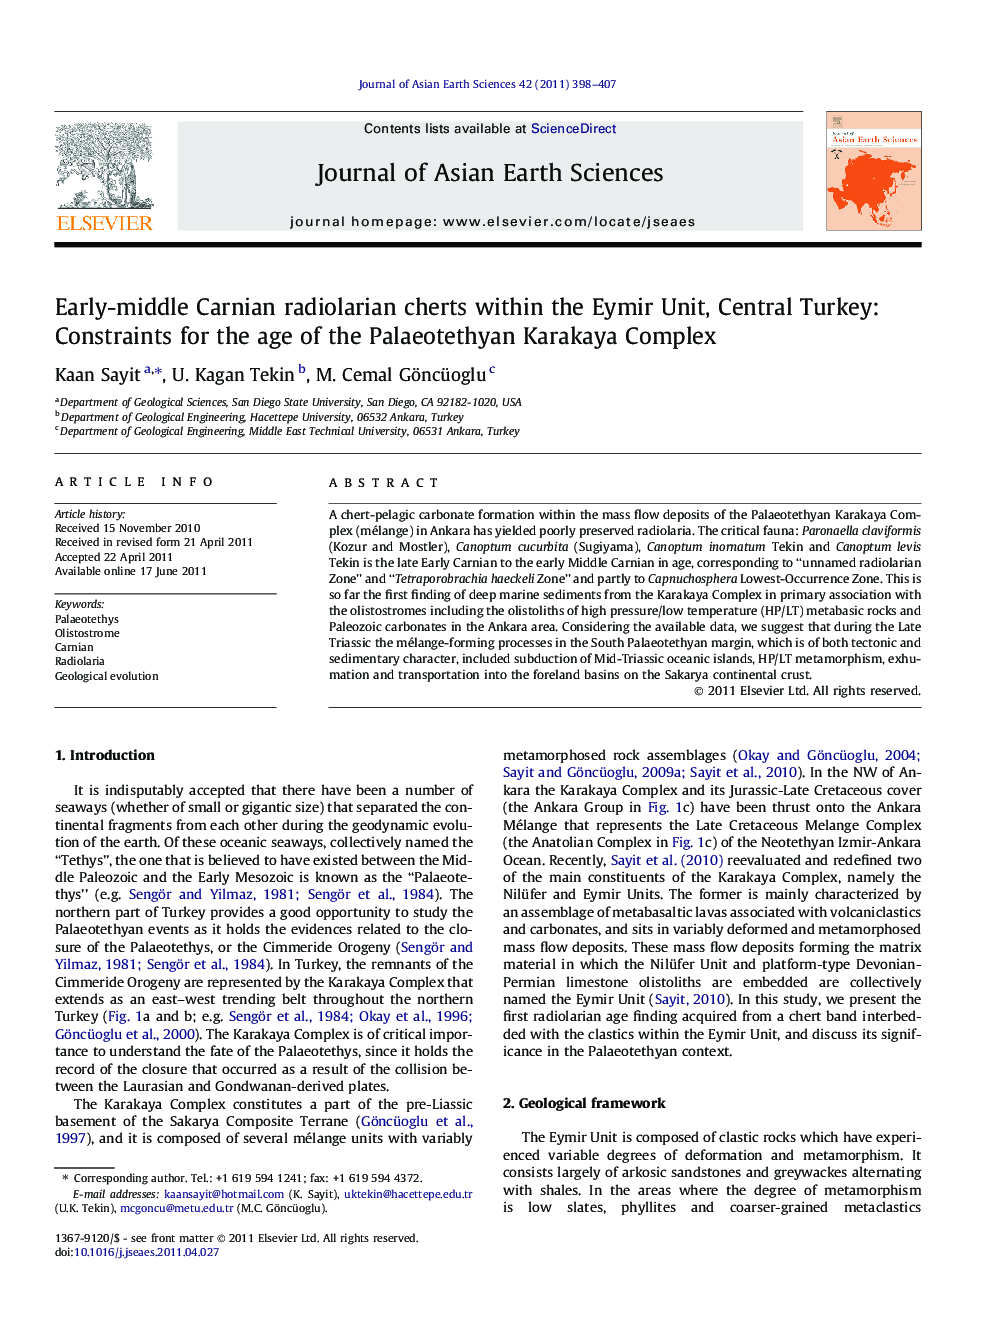 Early-middle Carnian radiolarian cherts within the Eymir Unit, Central Turkey: Constraints for the age of the Palaeotethyan Karakaya Complex